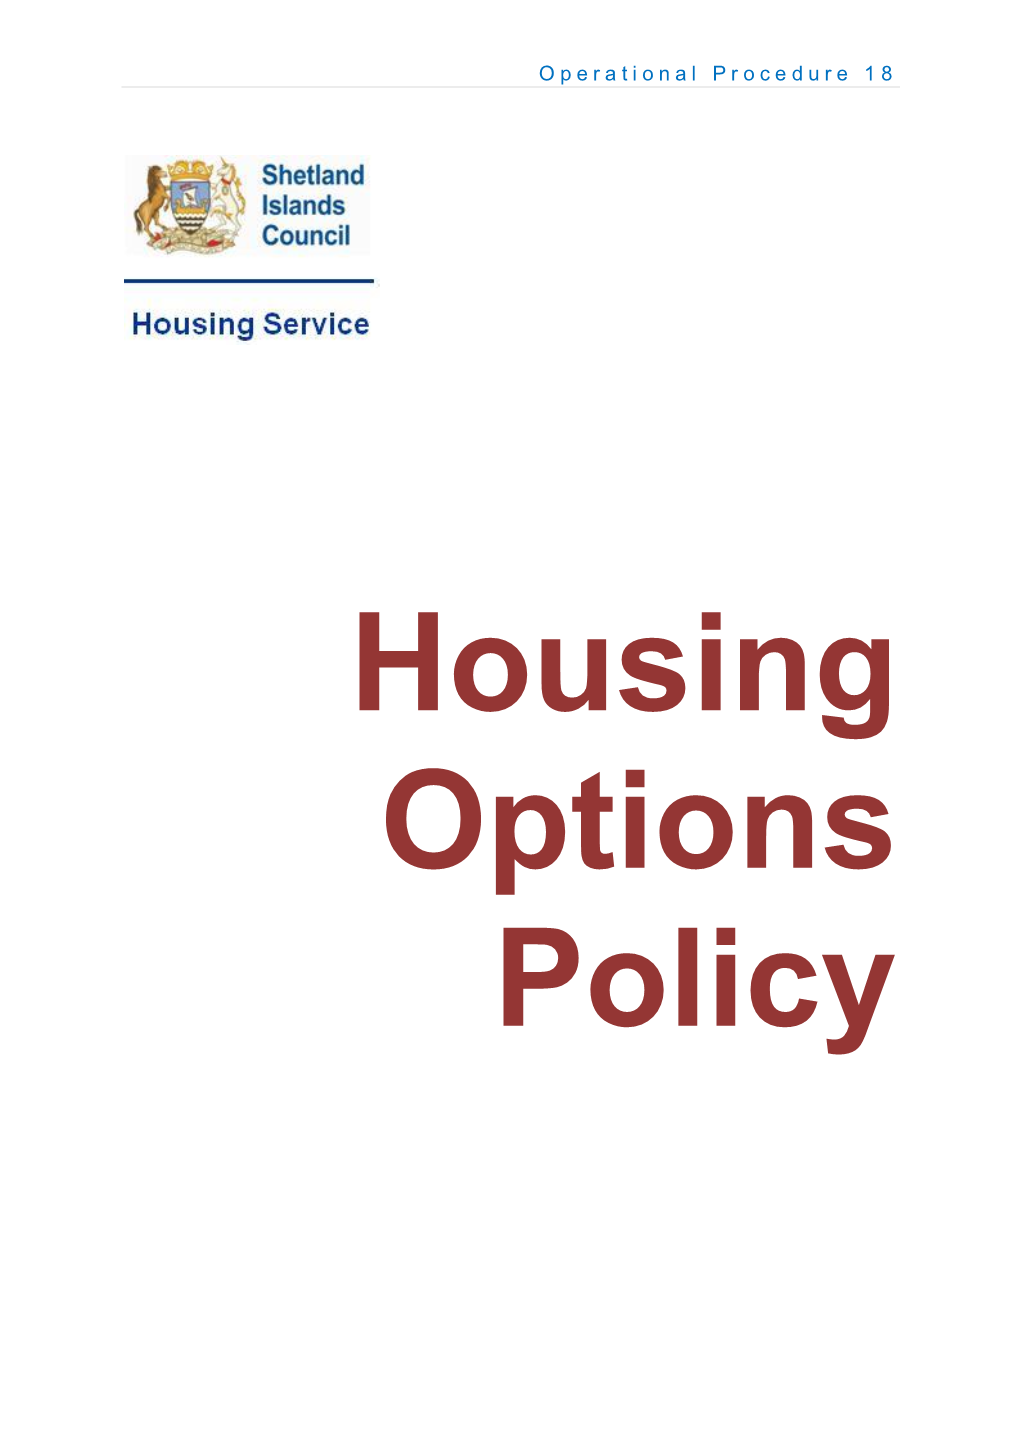 Housing Options Policy Will Be Supplemented with Substantial Staff Guidance to Ensure the Service Delivered to Applicants Is Fair, Consistent and Person-Centred